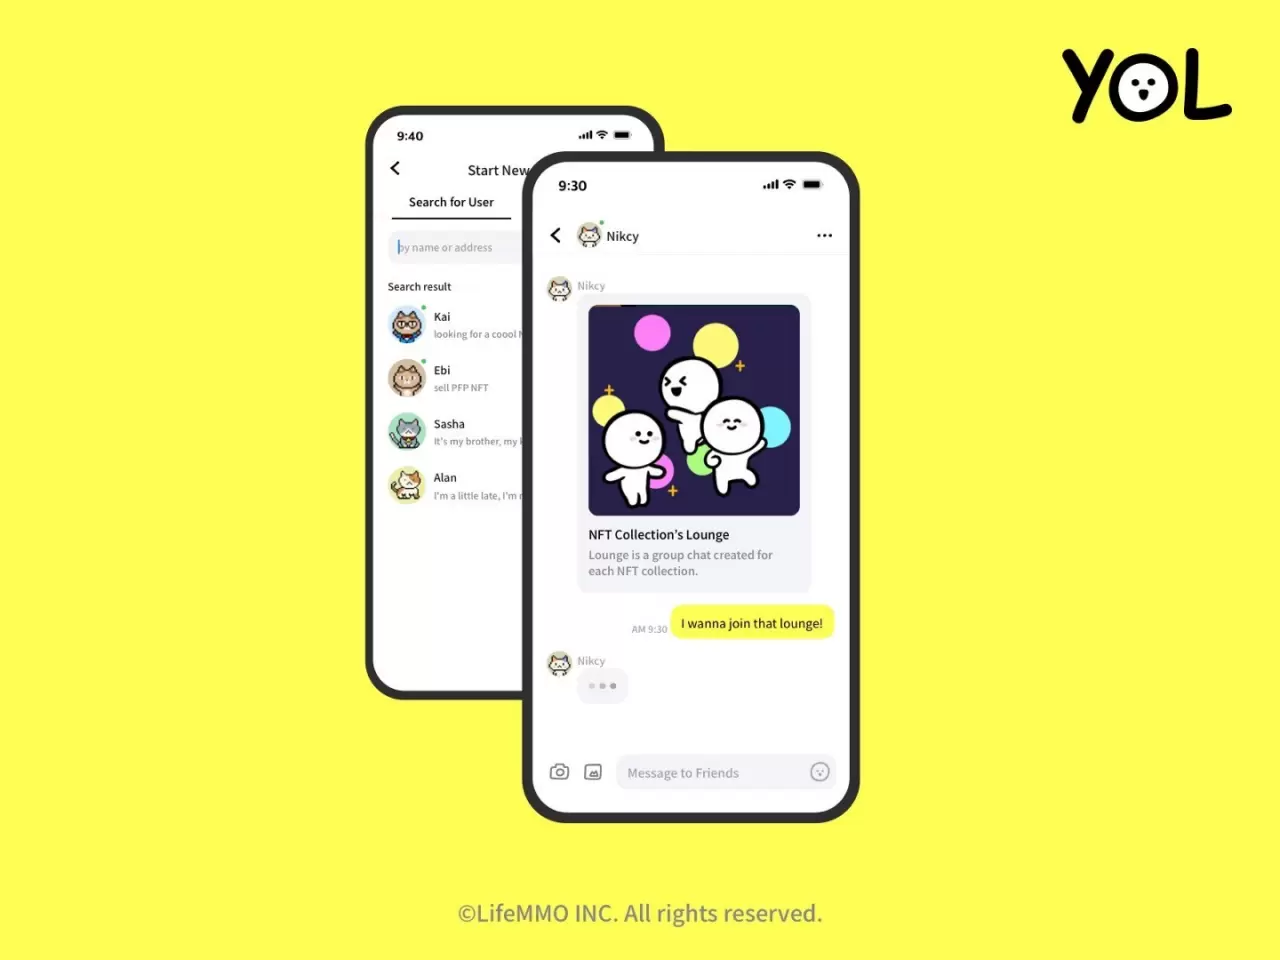 Life MMO releases the beta version of YOL, a crypto wallet address-based web messenger. img#1